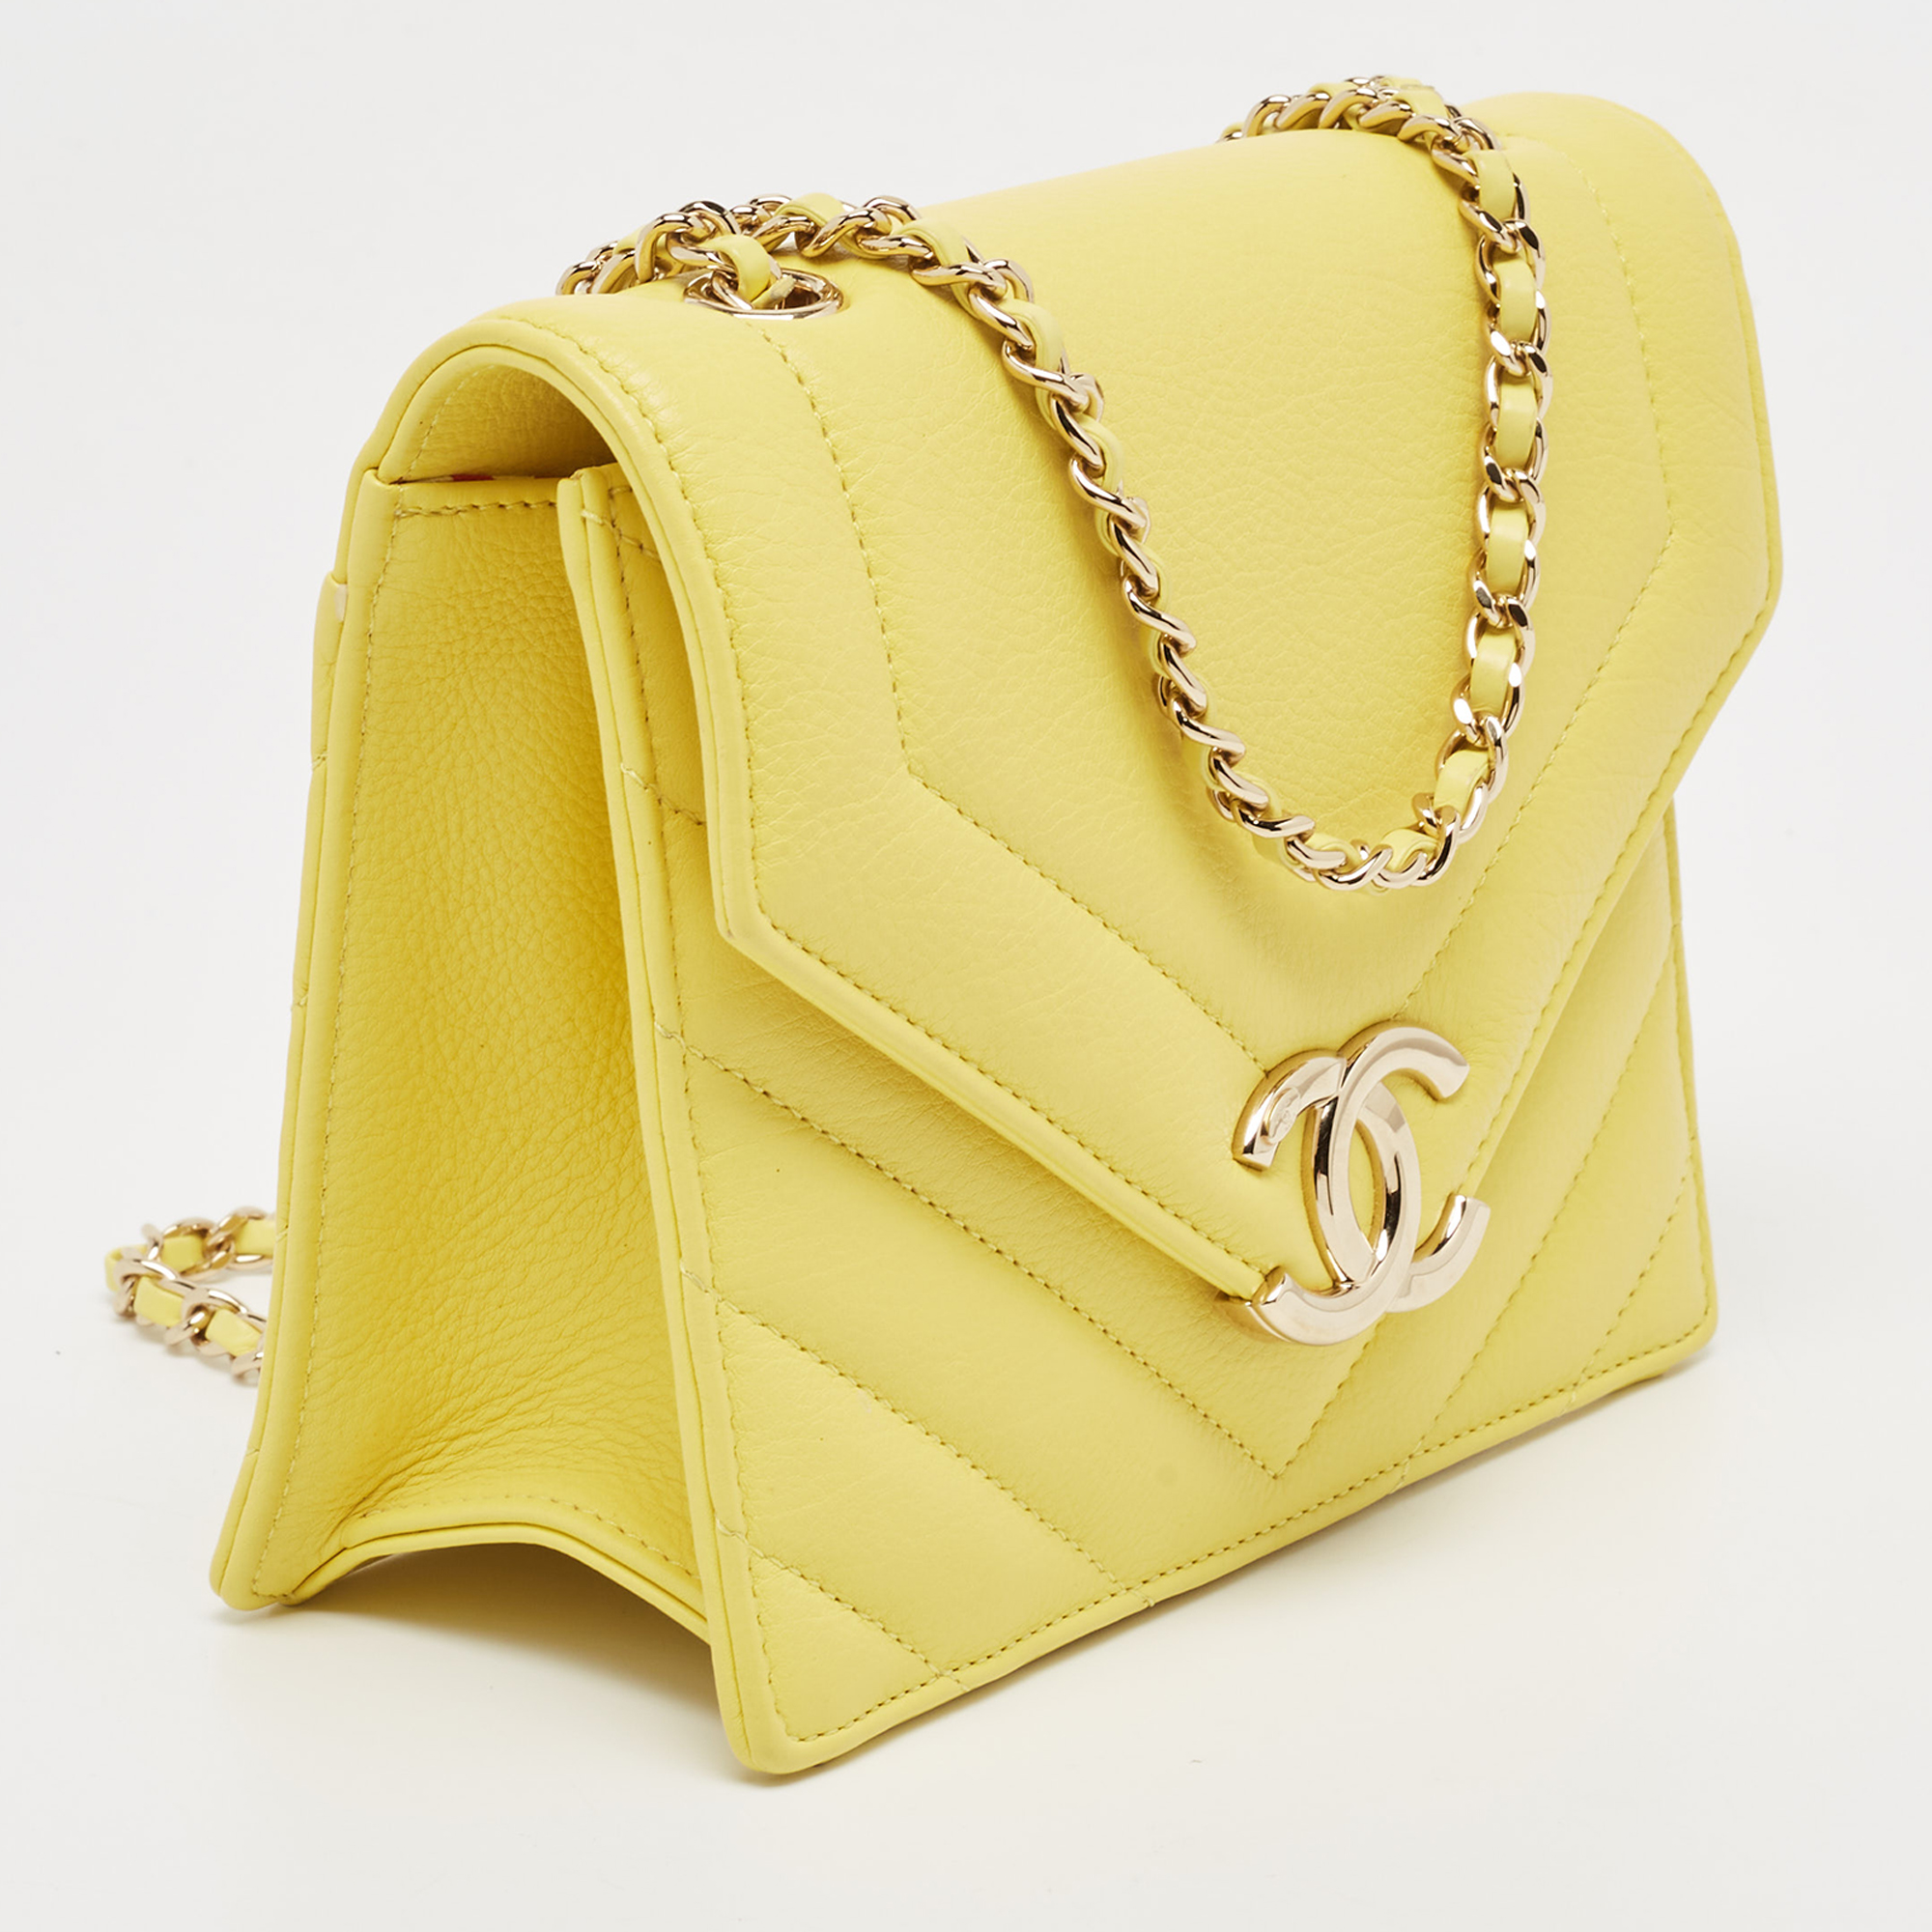 Chanel Yellow Leather  Small Vintage Chevron Flap Bag